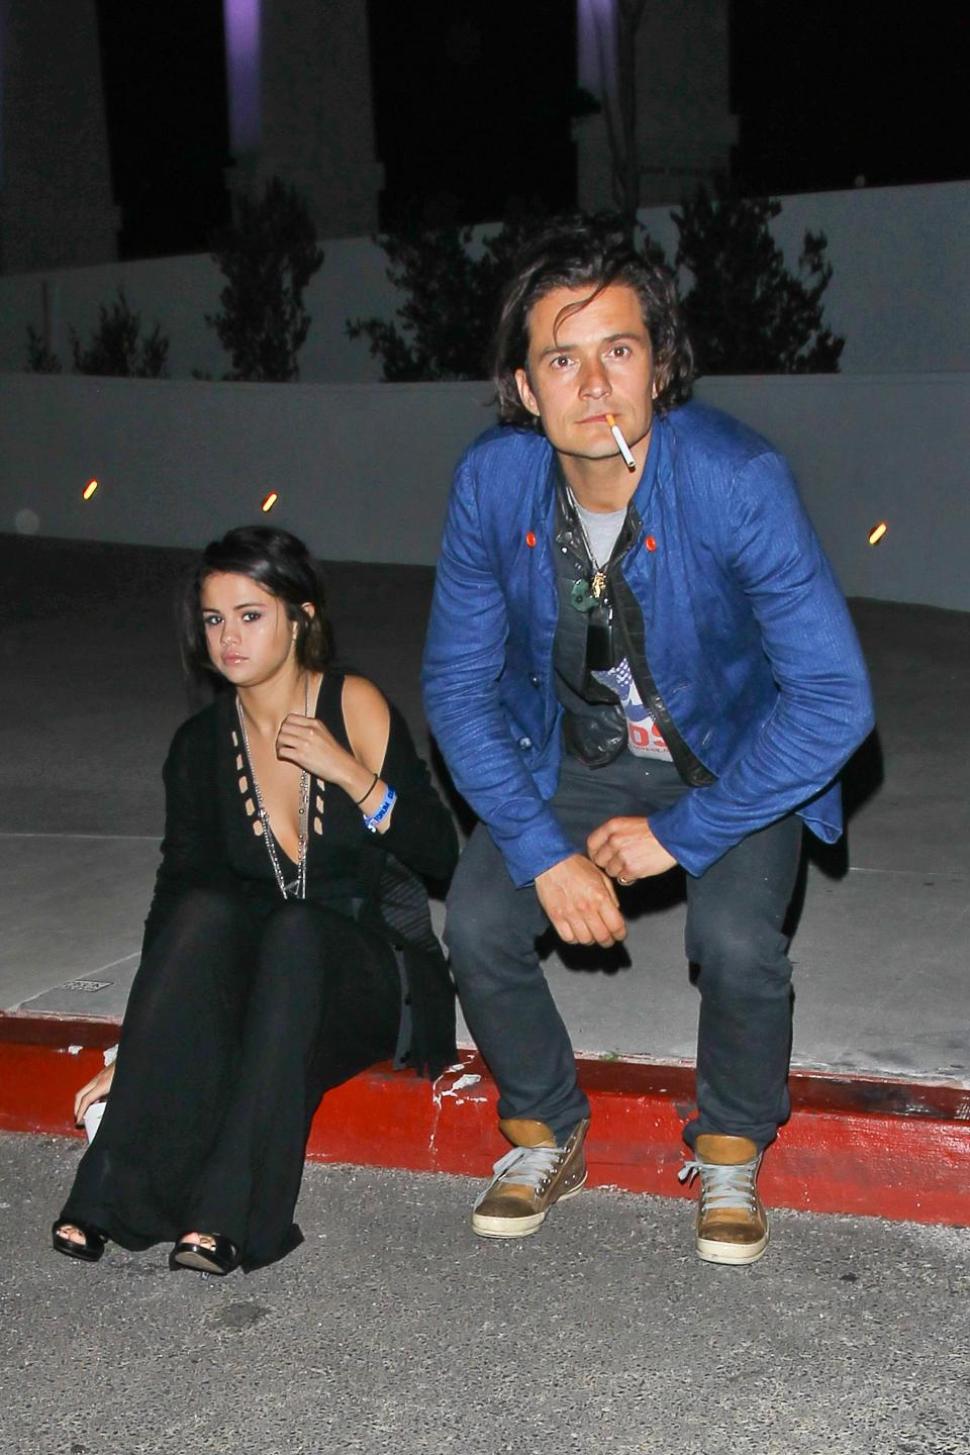 Orlando Bloom and Selena Gomez were snapped in April sitting and chatting together in Los Angeles.